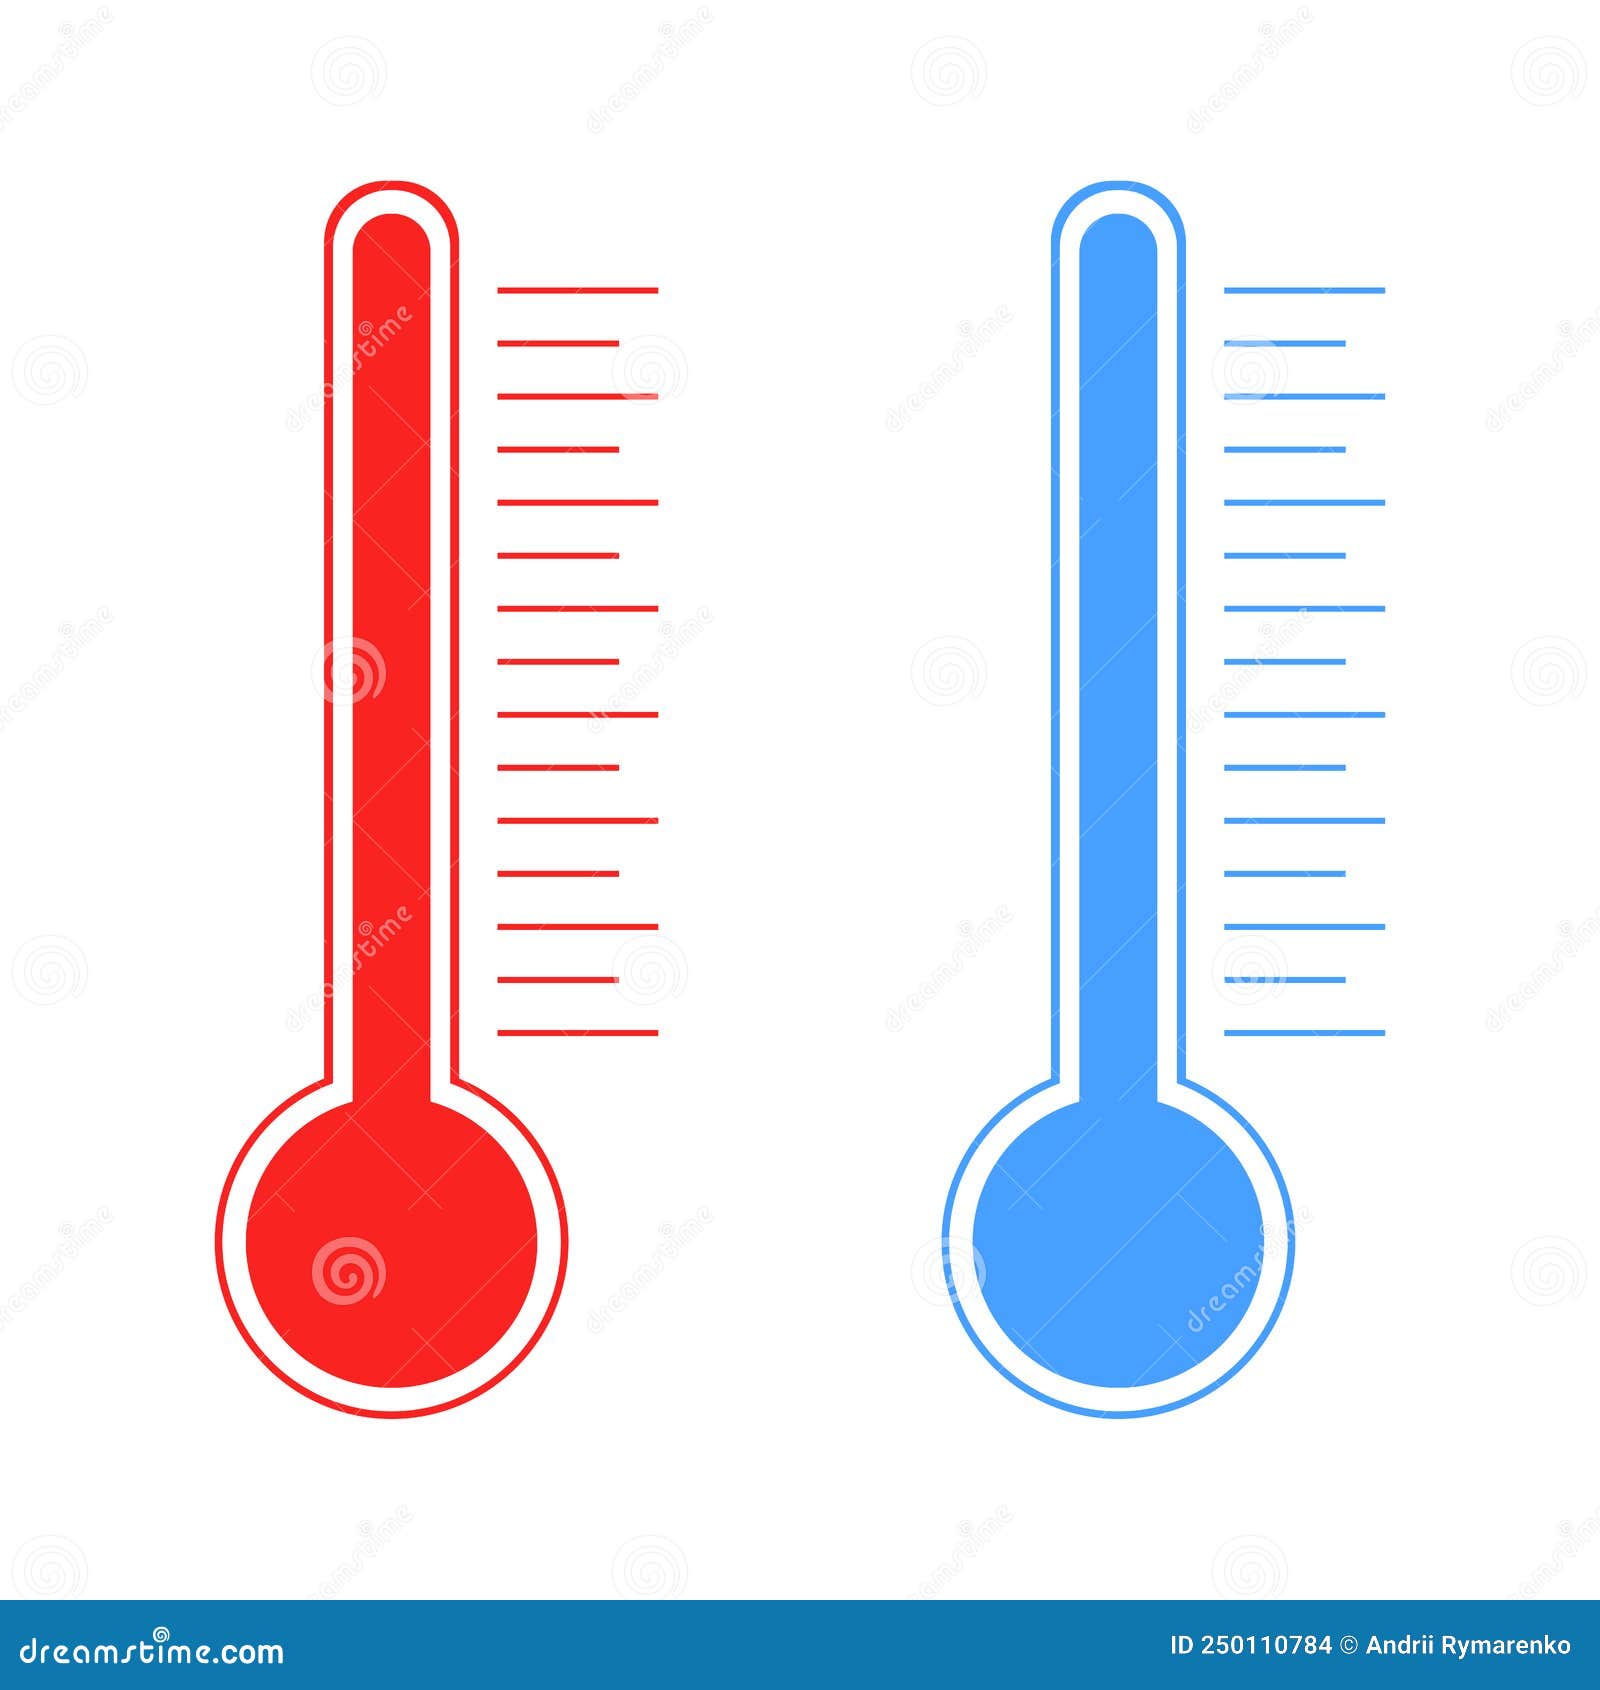 Premium Vector  Cold warm thermometer. temperature weather thermometers  with celsius and fahrenheit scale. thermostat meteorology icon